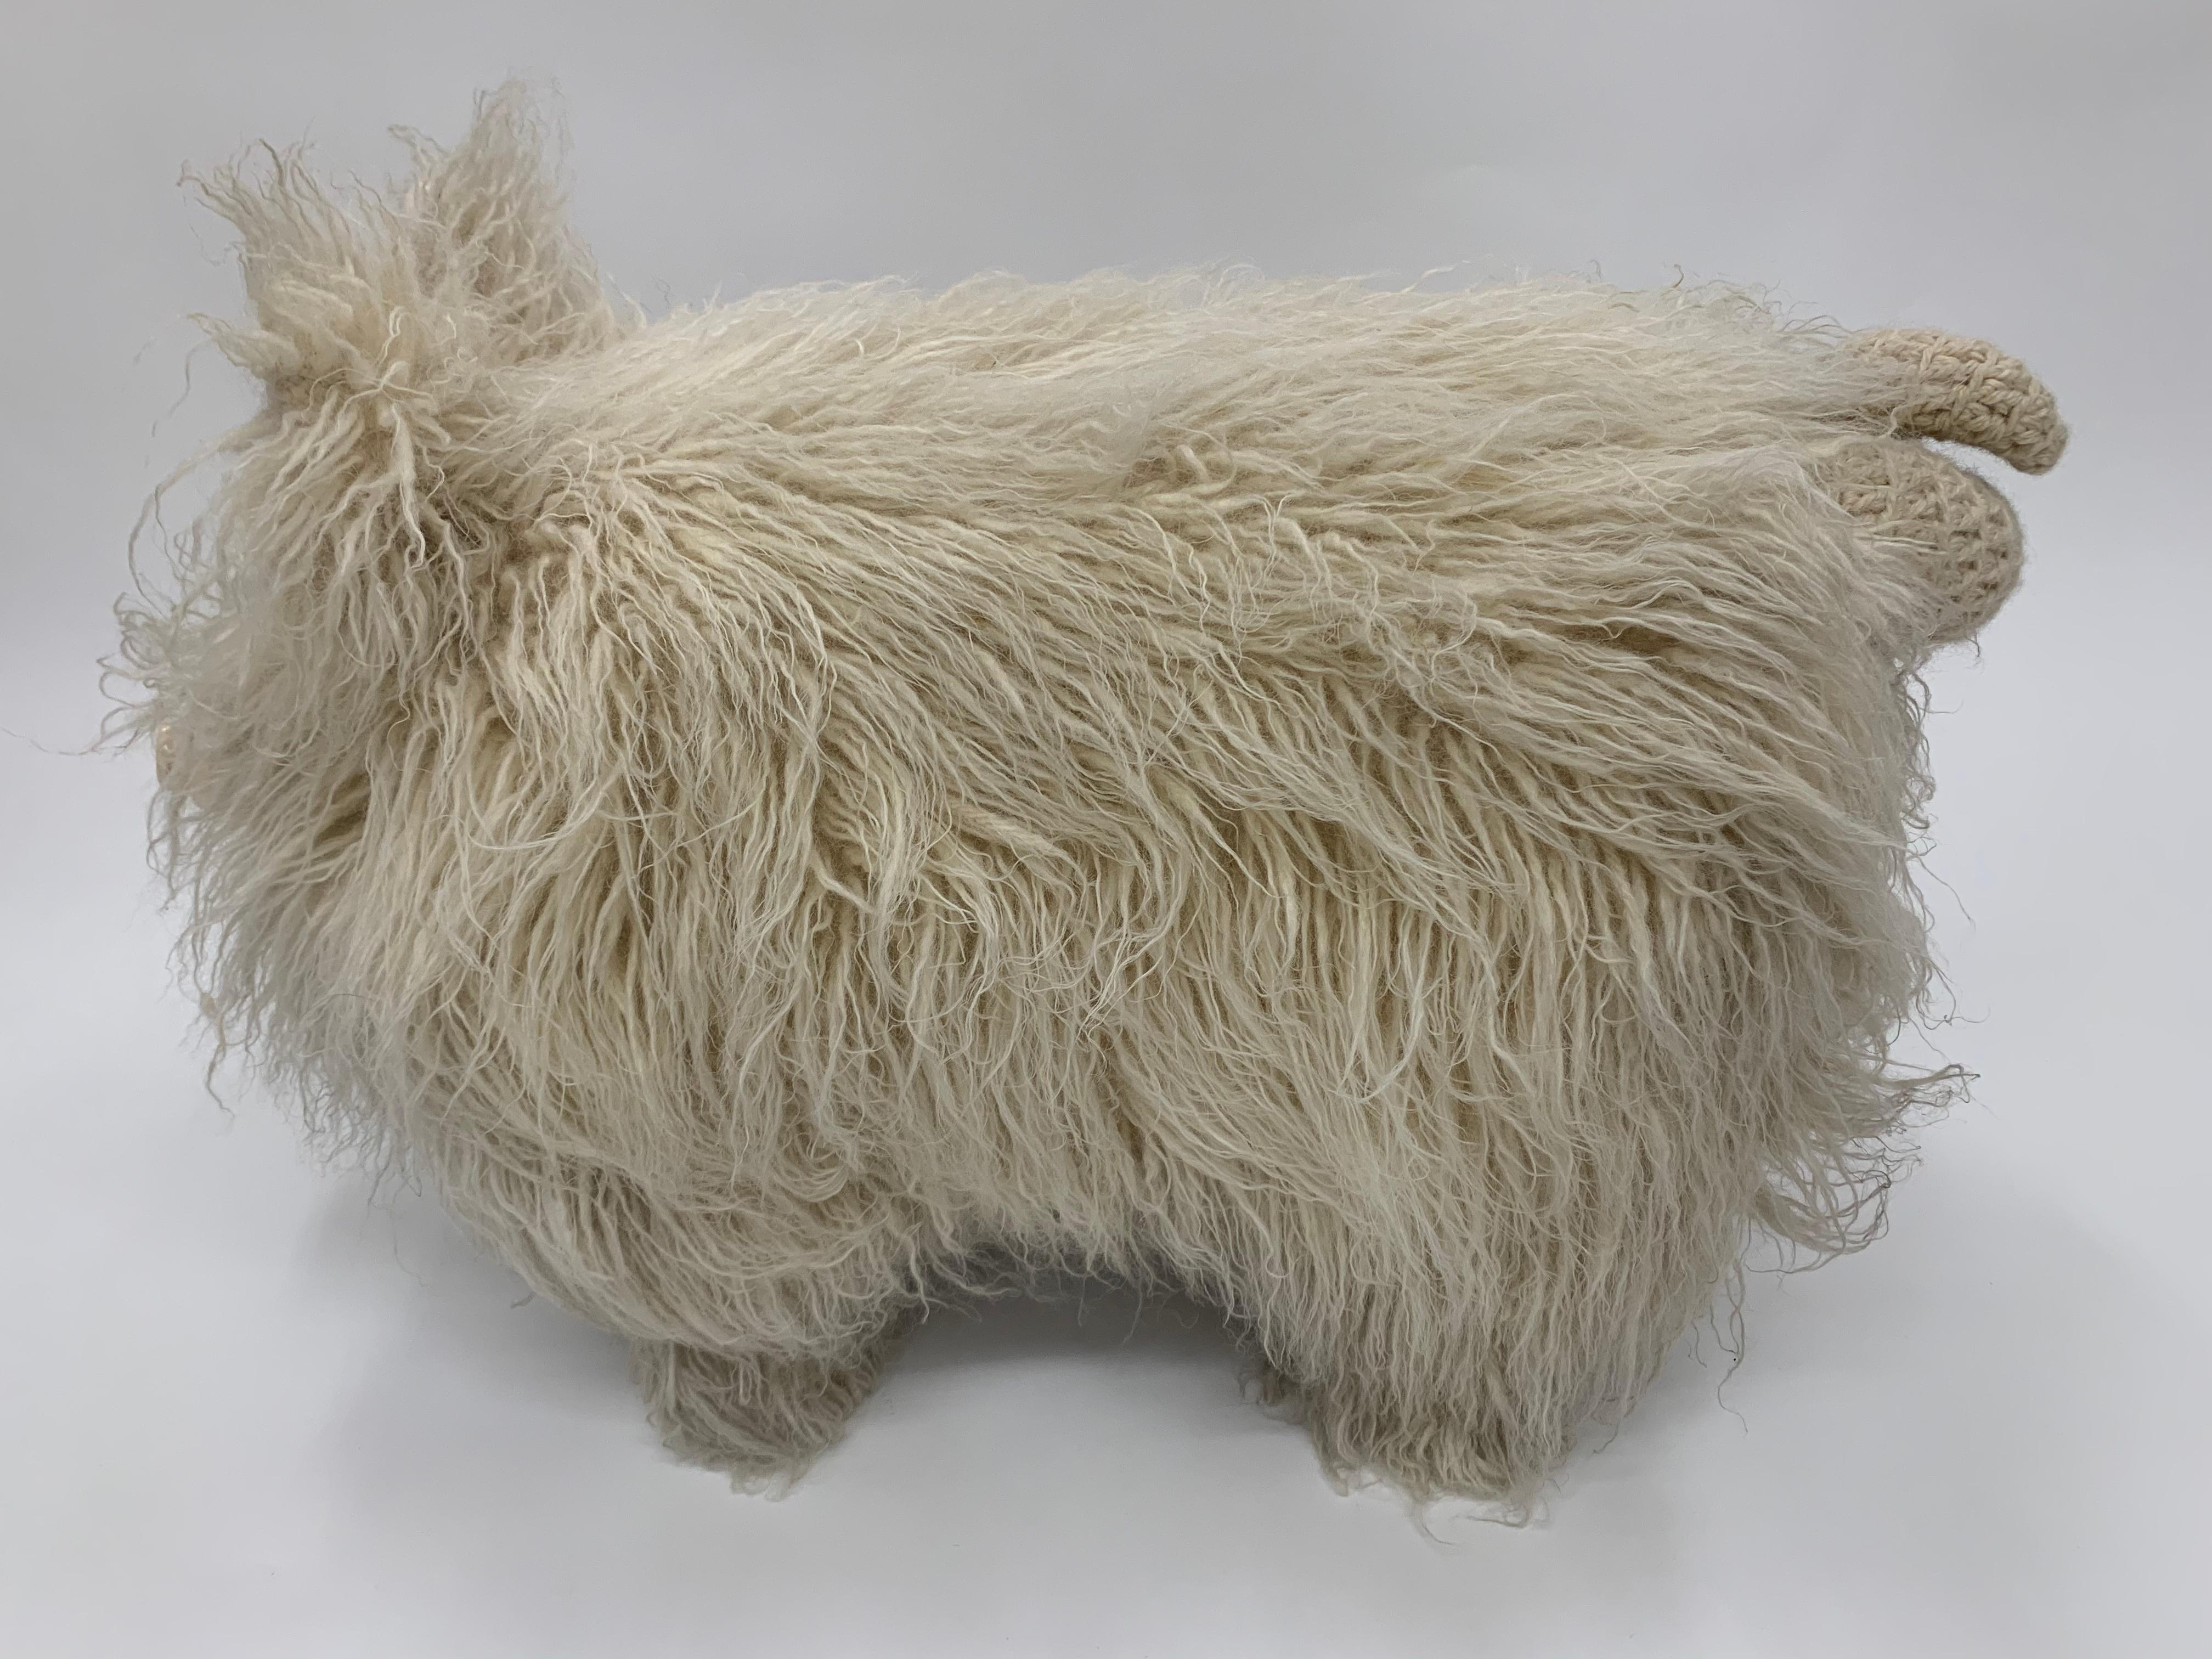 Sculptural Edna Cataldo Pig Flokati Wool Foot Stool, Signed and Dated 1995 2